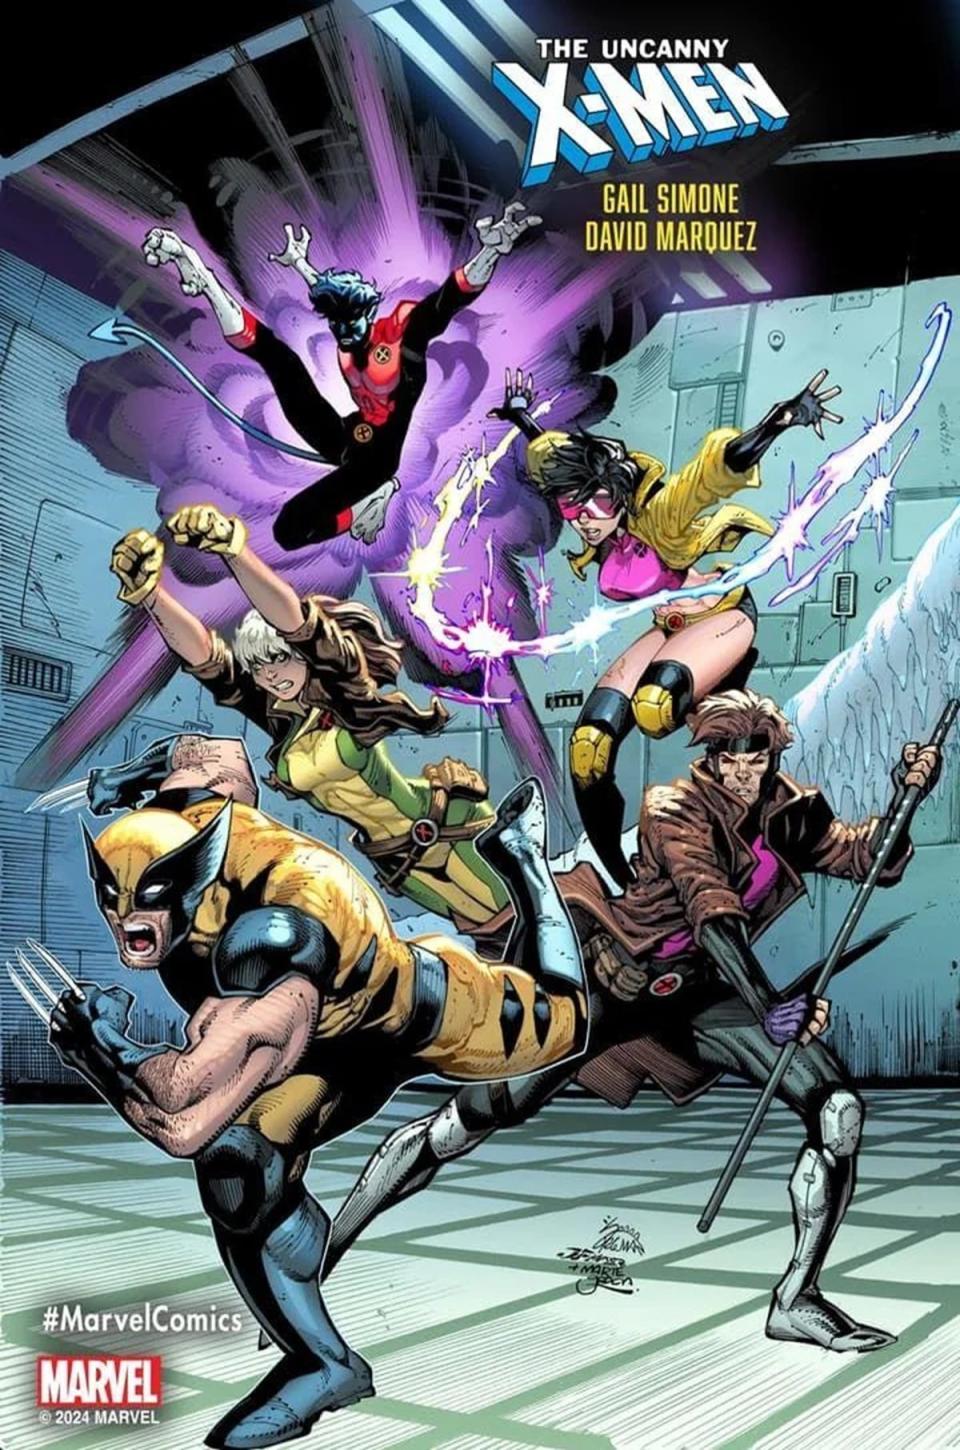 Promo art for the new Uncanny X-Men relaunch from Ryan Stegman and Marte Gracia.